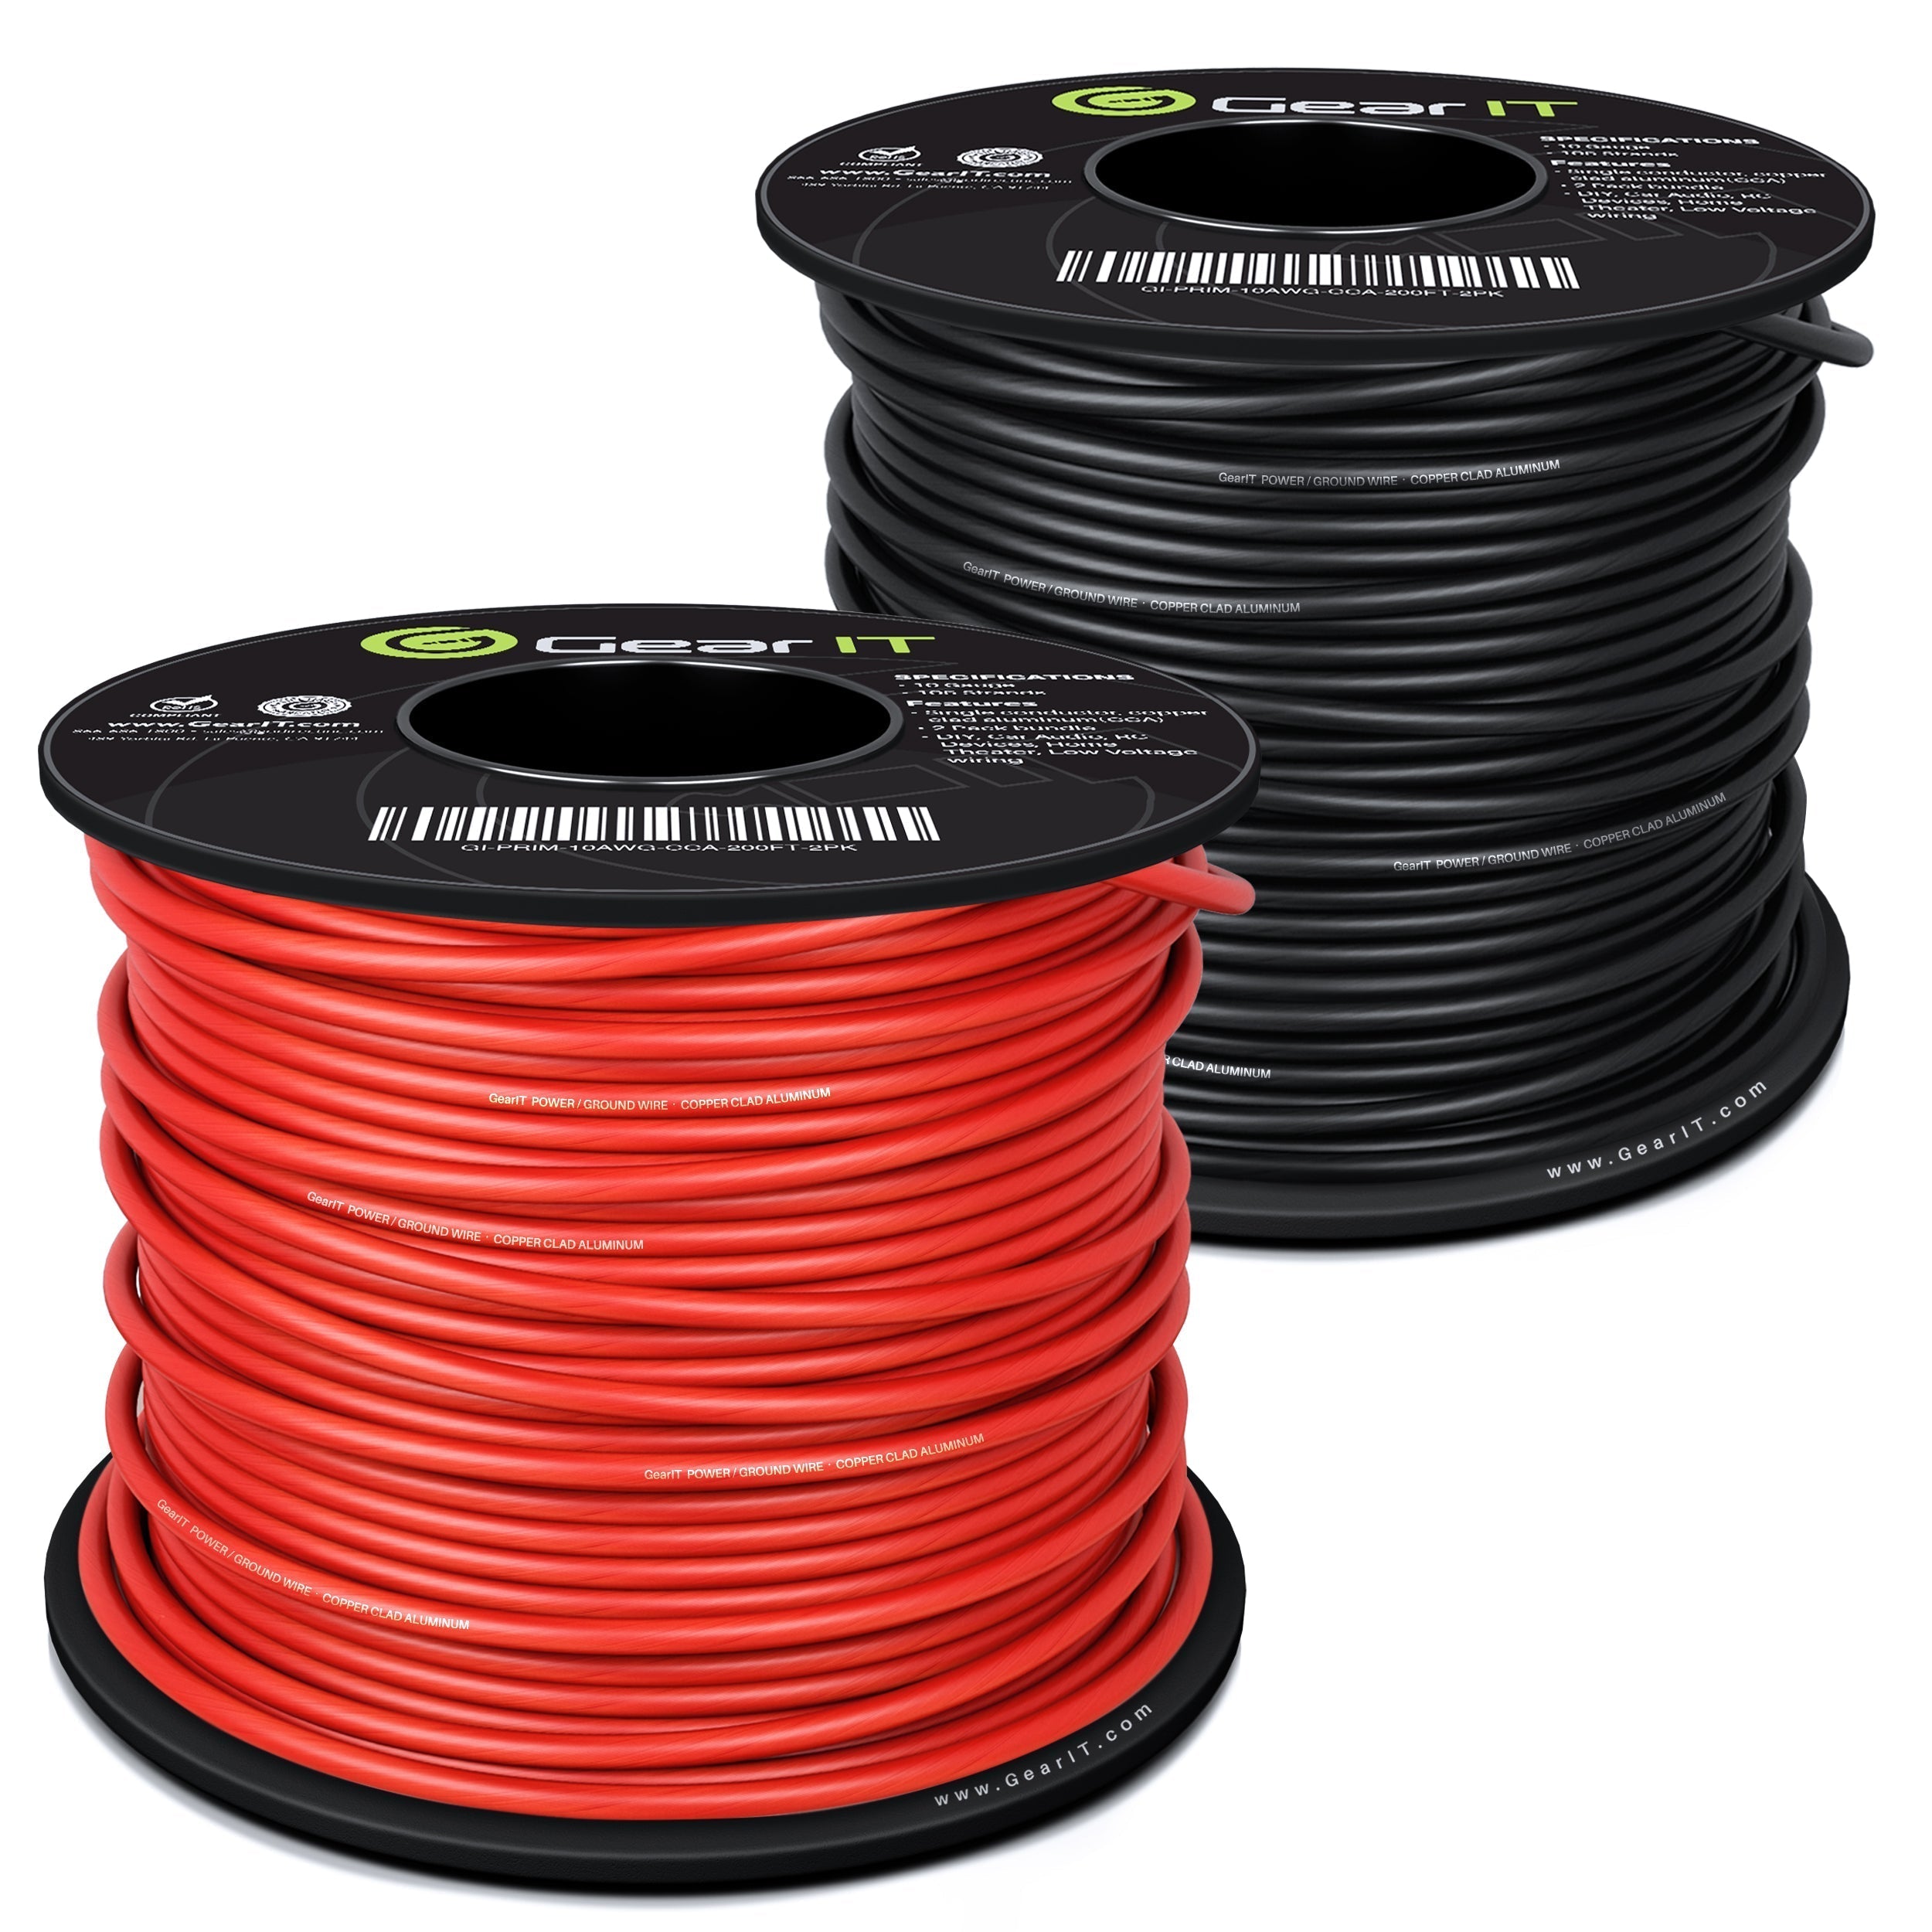 GearIT 16 Gauge Wire (50ft Each - Black/Red) Copper Clad Aluminum CCA -  Primary Automotive Power/Ground for Battery Cable, Car Audio, Trailer  Harness